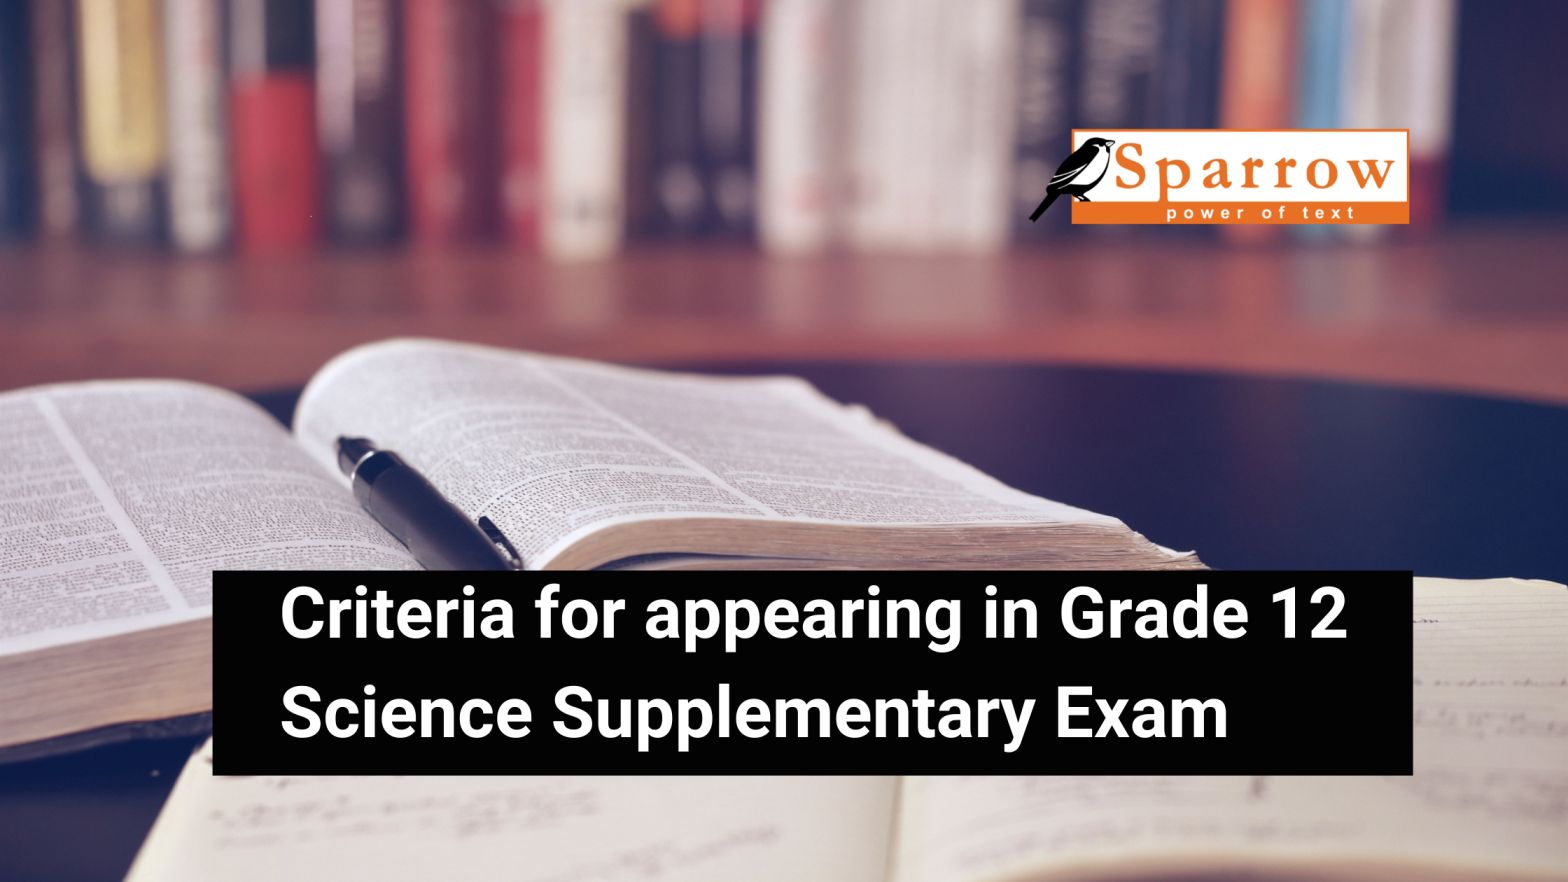 Criteria-for-appearing-in-Grade-12-Science-Supplementary-Exam